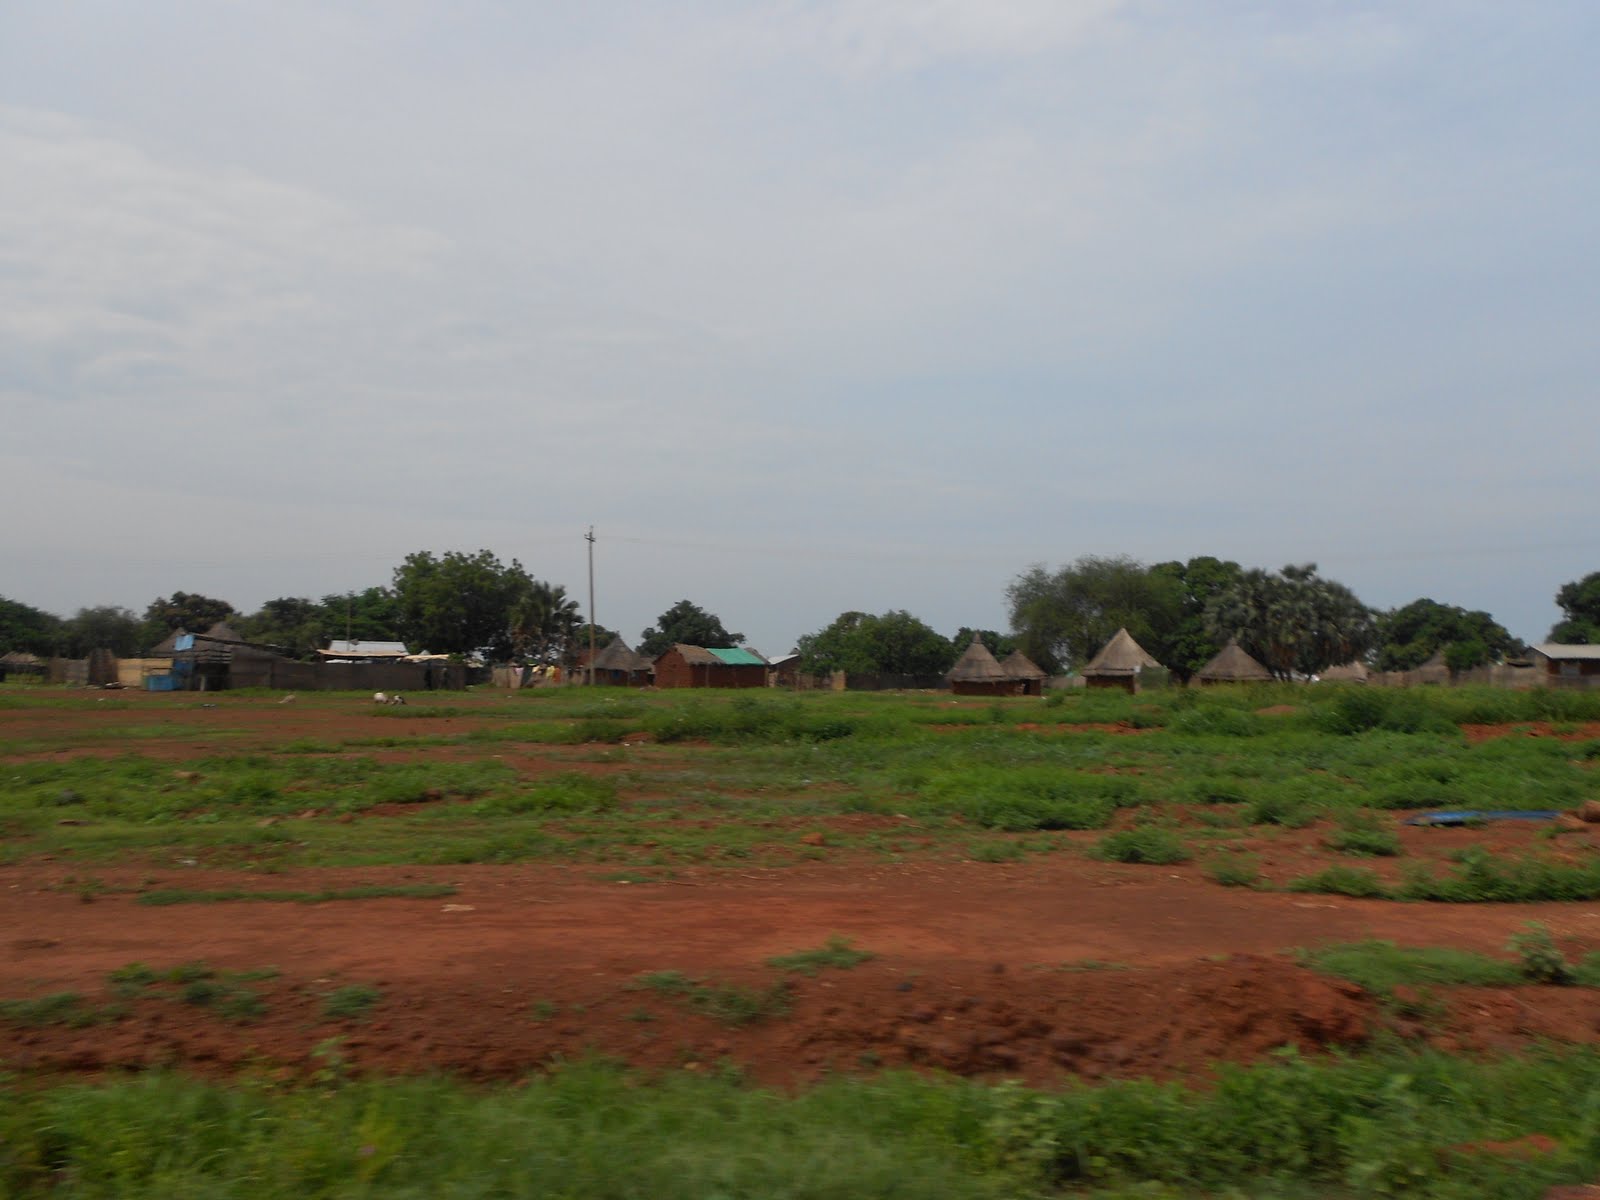 Africa 2011: Moving to Wau